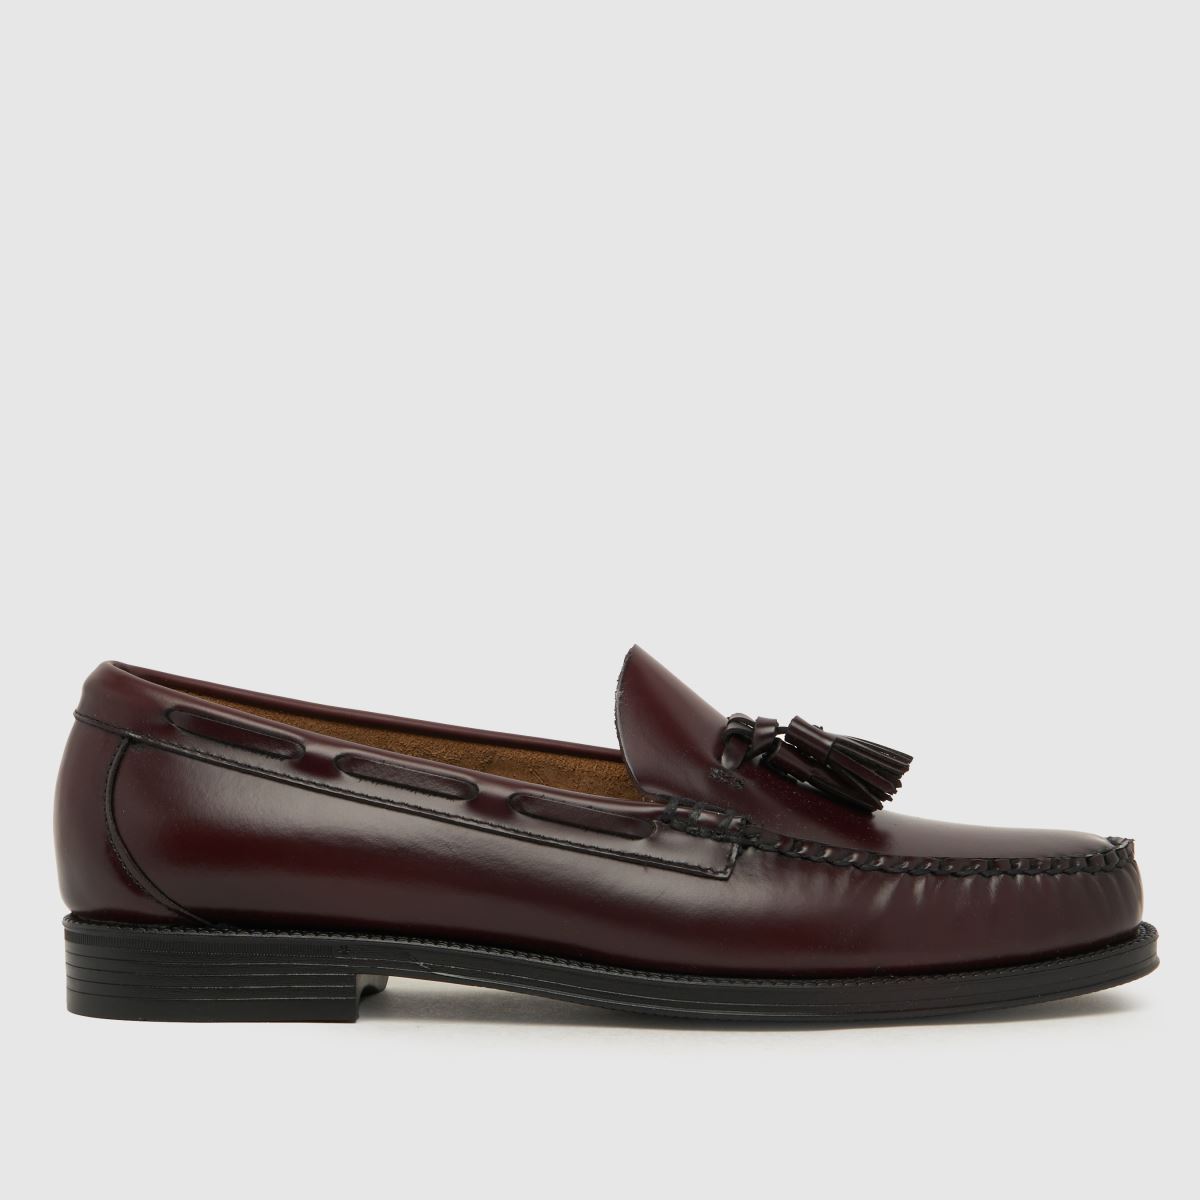 G.H. BASS weejun ii larson penny loafer shoes in burgundy